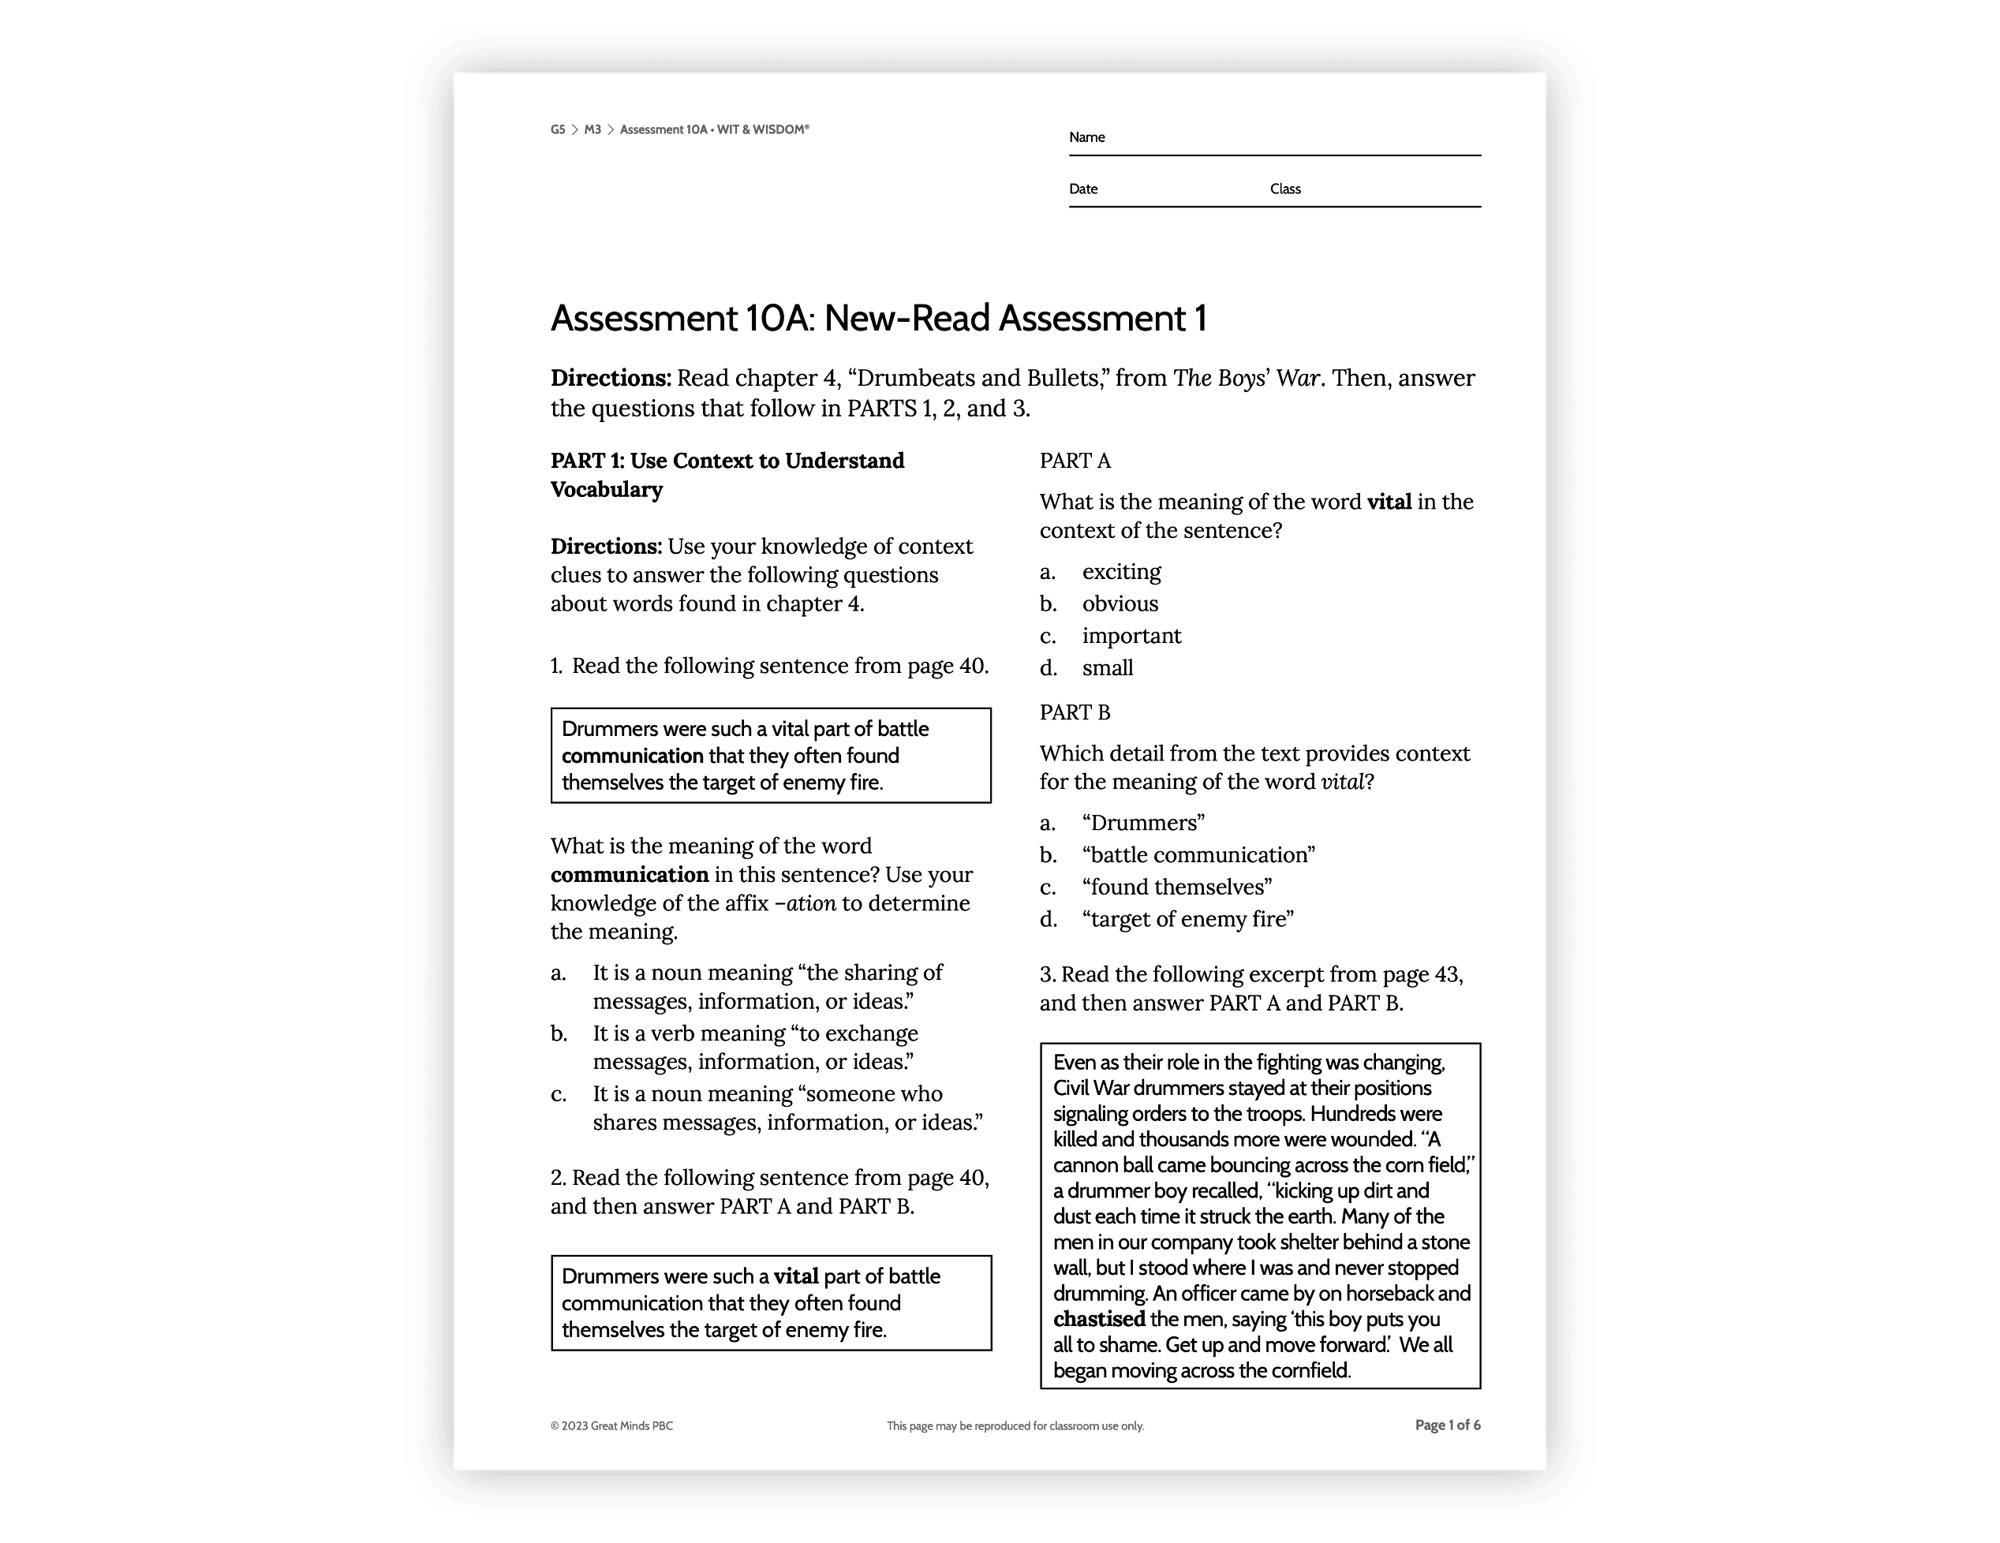 Wit & Wisdom - Sample, Assessment 10A: New-Read Assessment 1